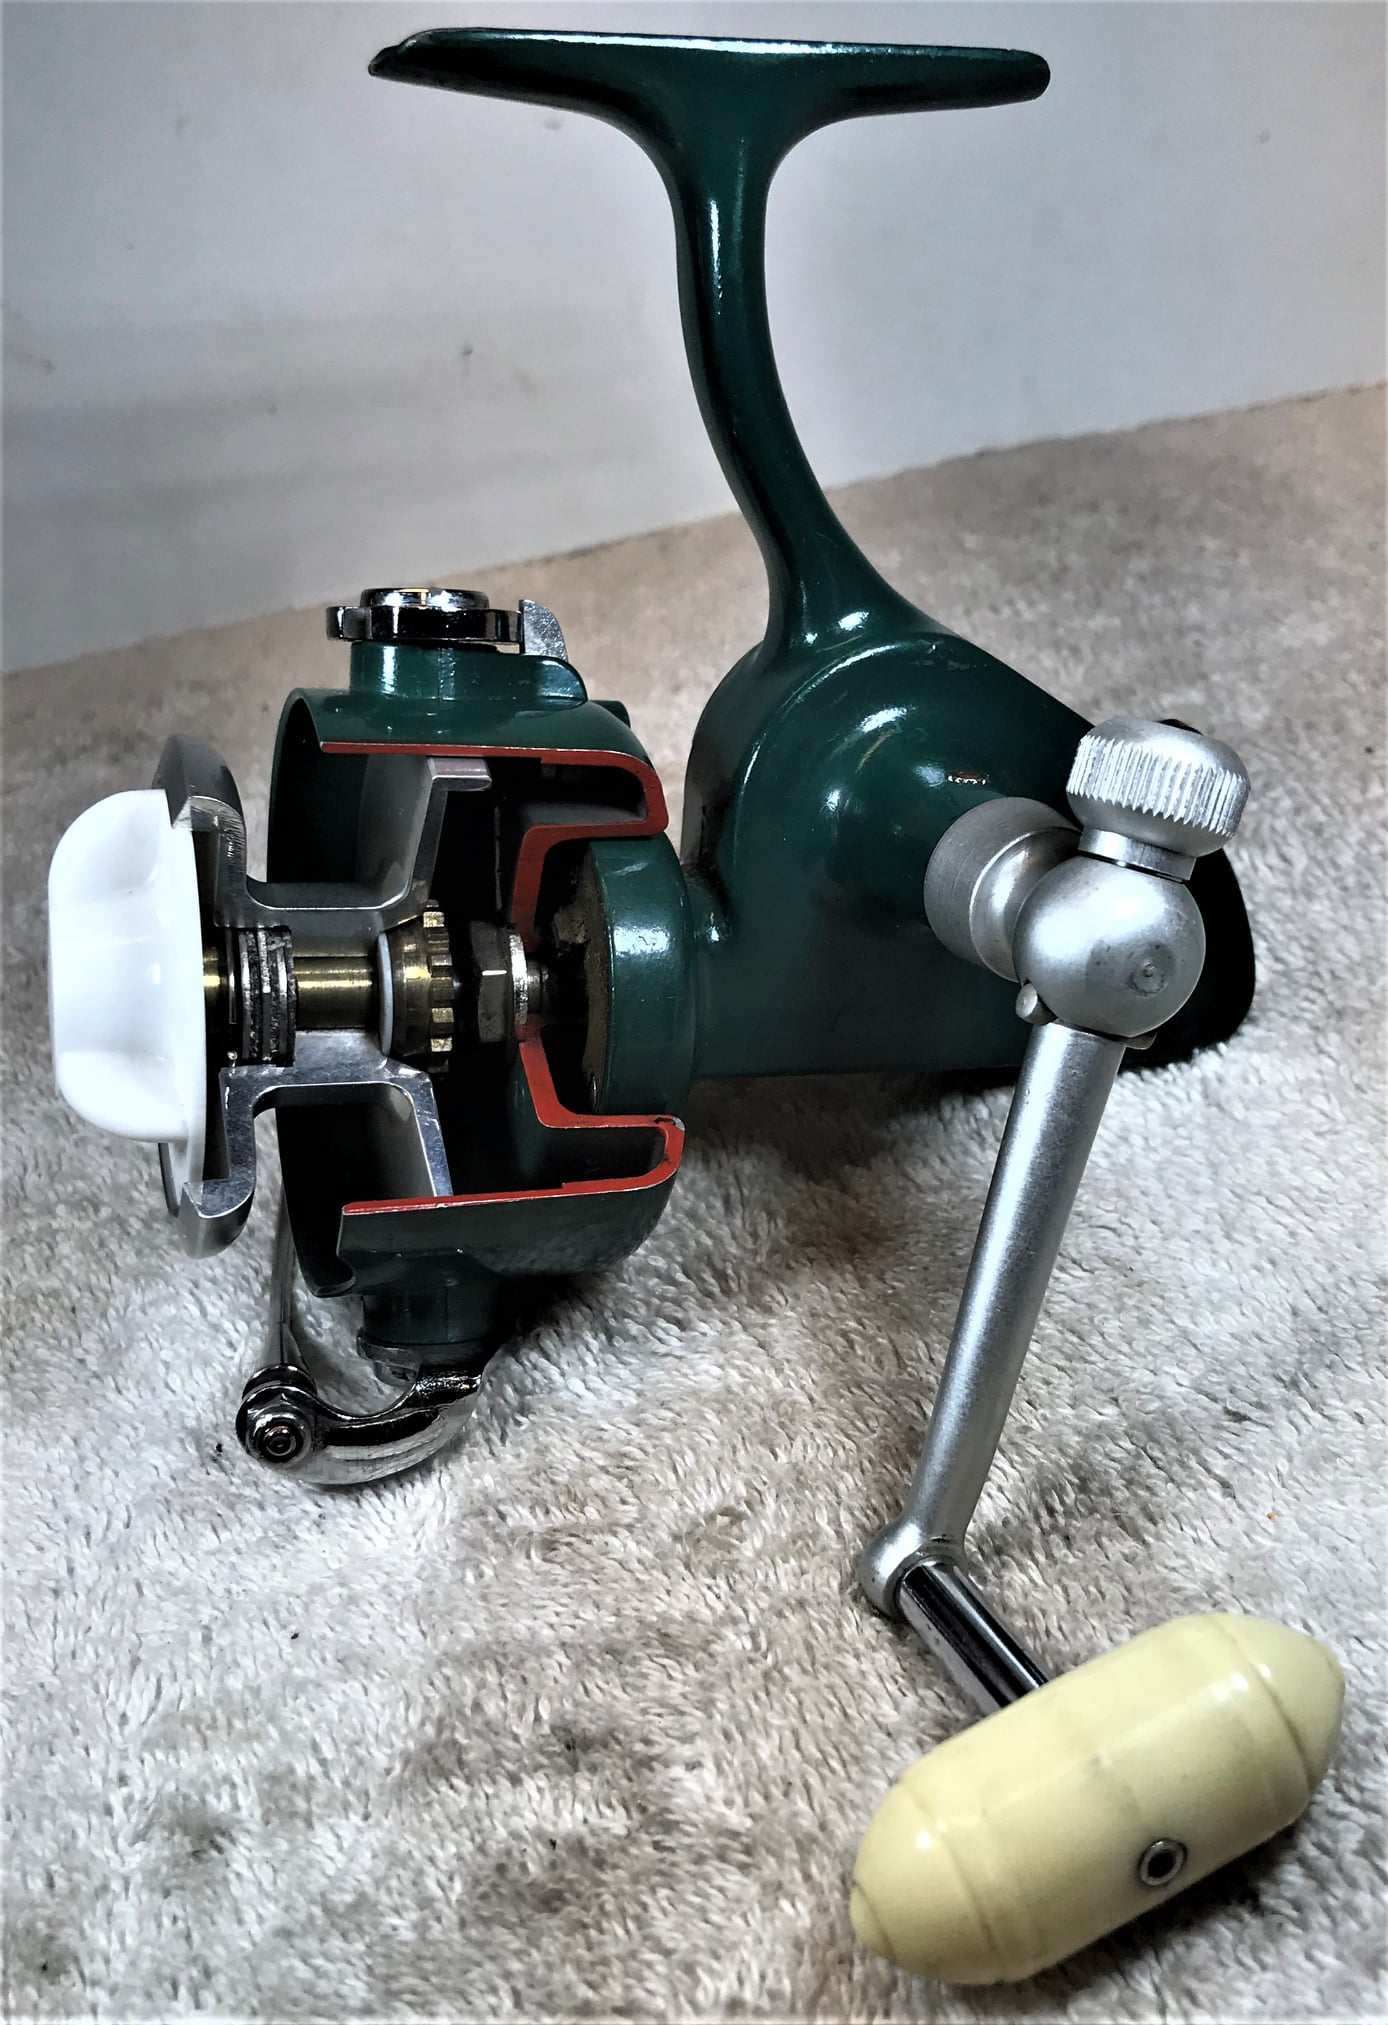 Penn SpinFisher 712Z How to take apart and service this classic spin  fishing reel 